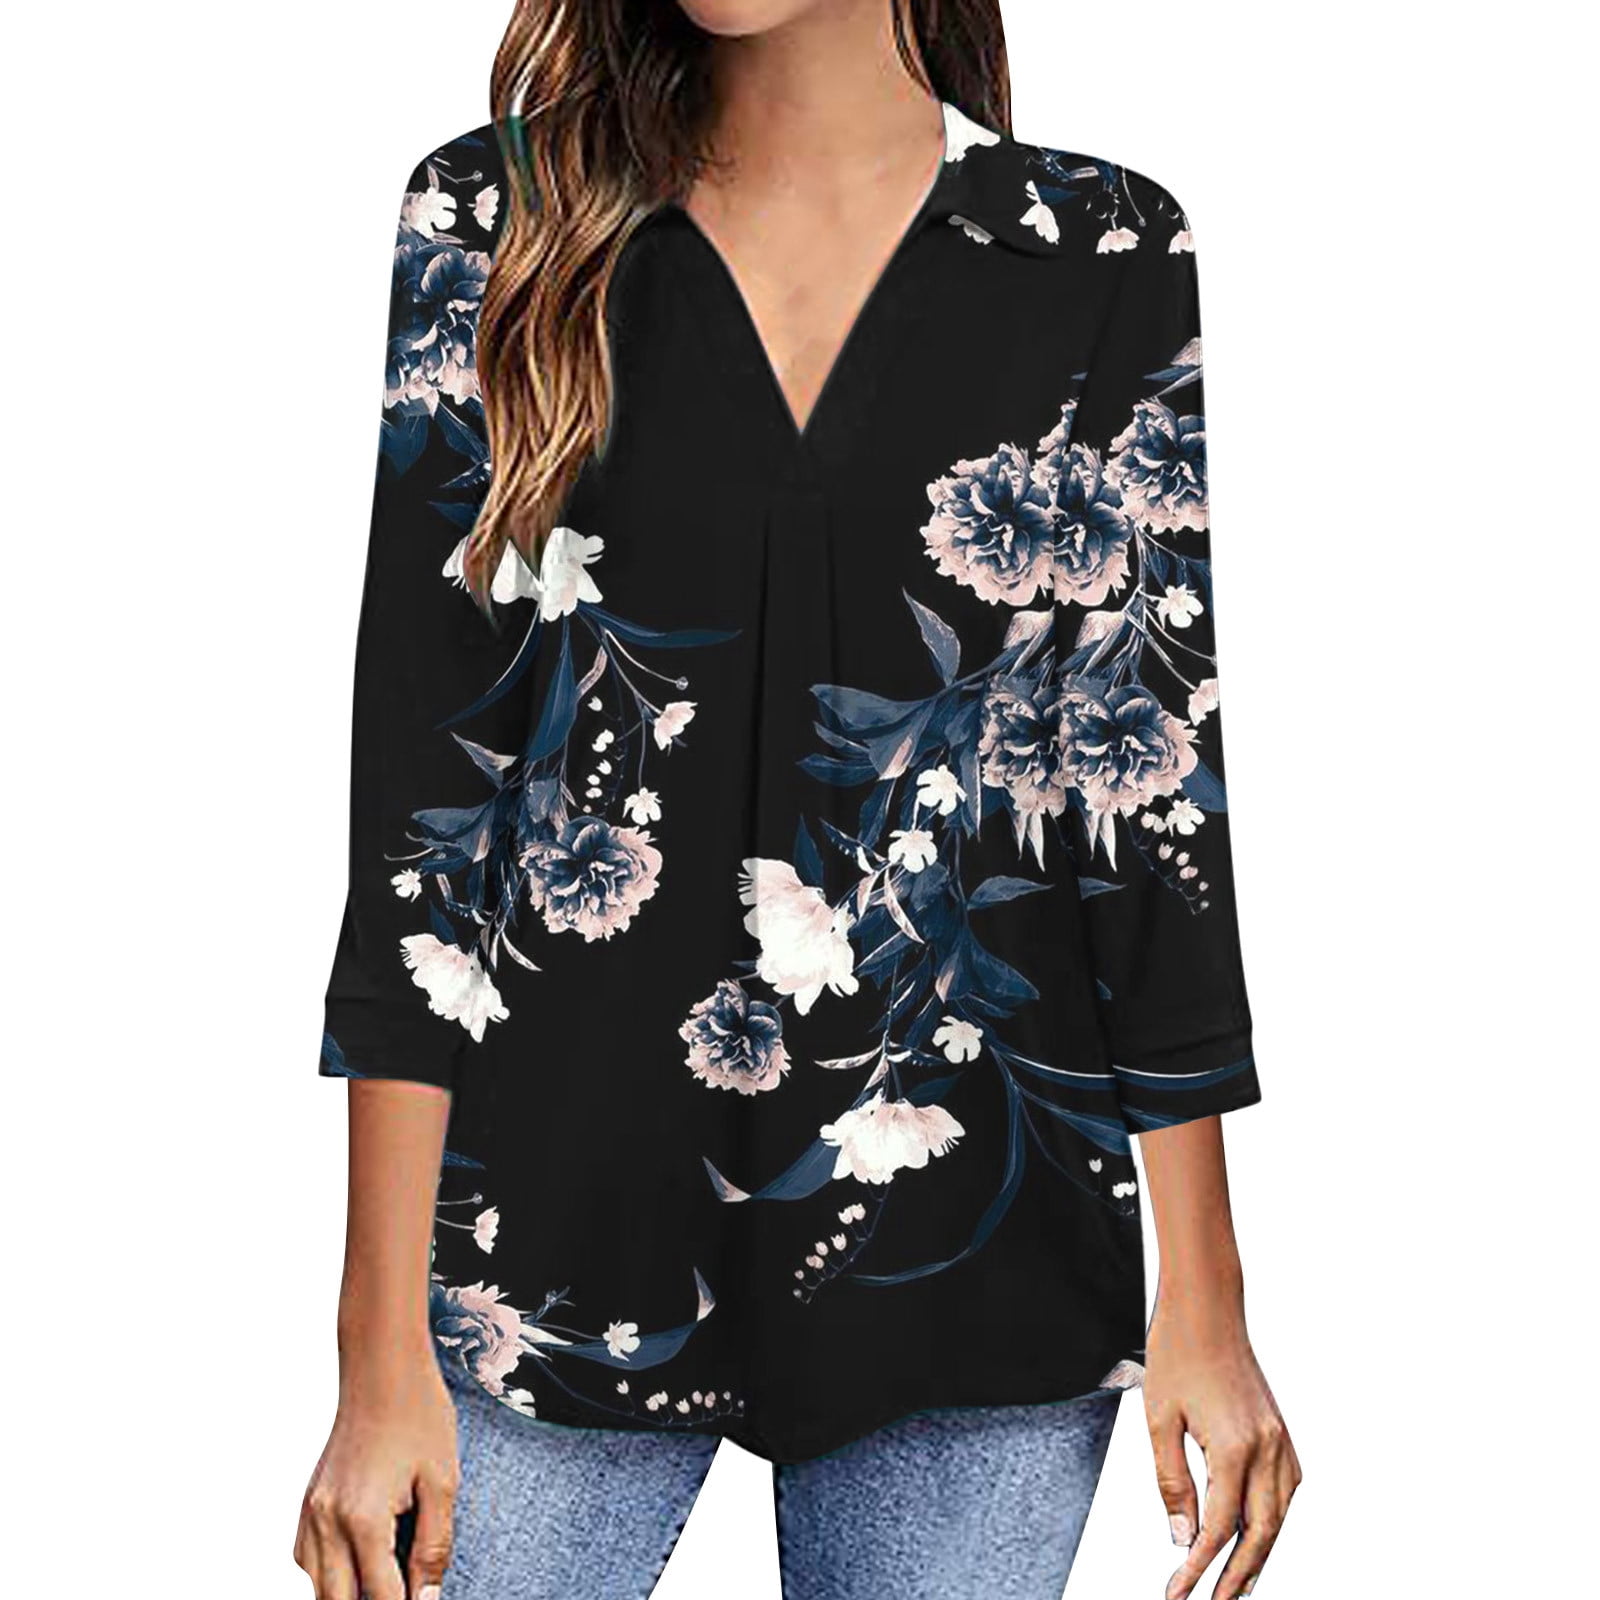  Women Prints Casual V Neck Short Sleeved A,0.01 Cent Items only,1  Dollar Stuff,Outlet Today Clearance Women,Items Under 3 Dollars,Clearance  Womens Tunic : Clothing, Shoes & Jewelry